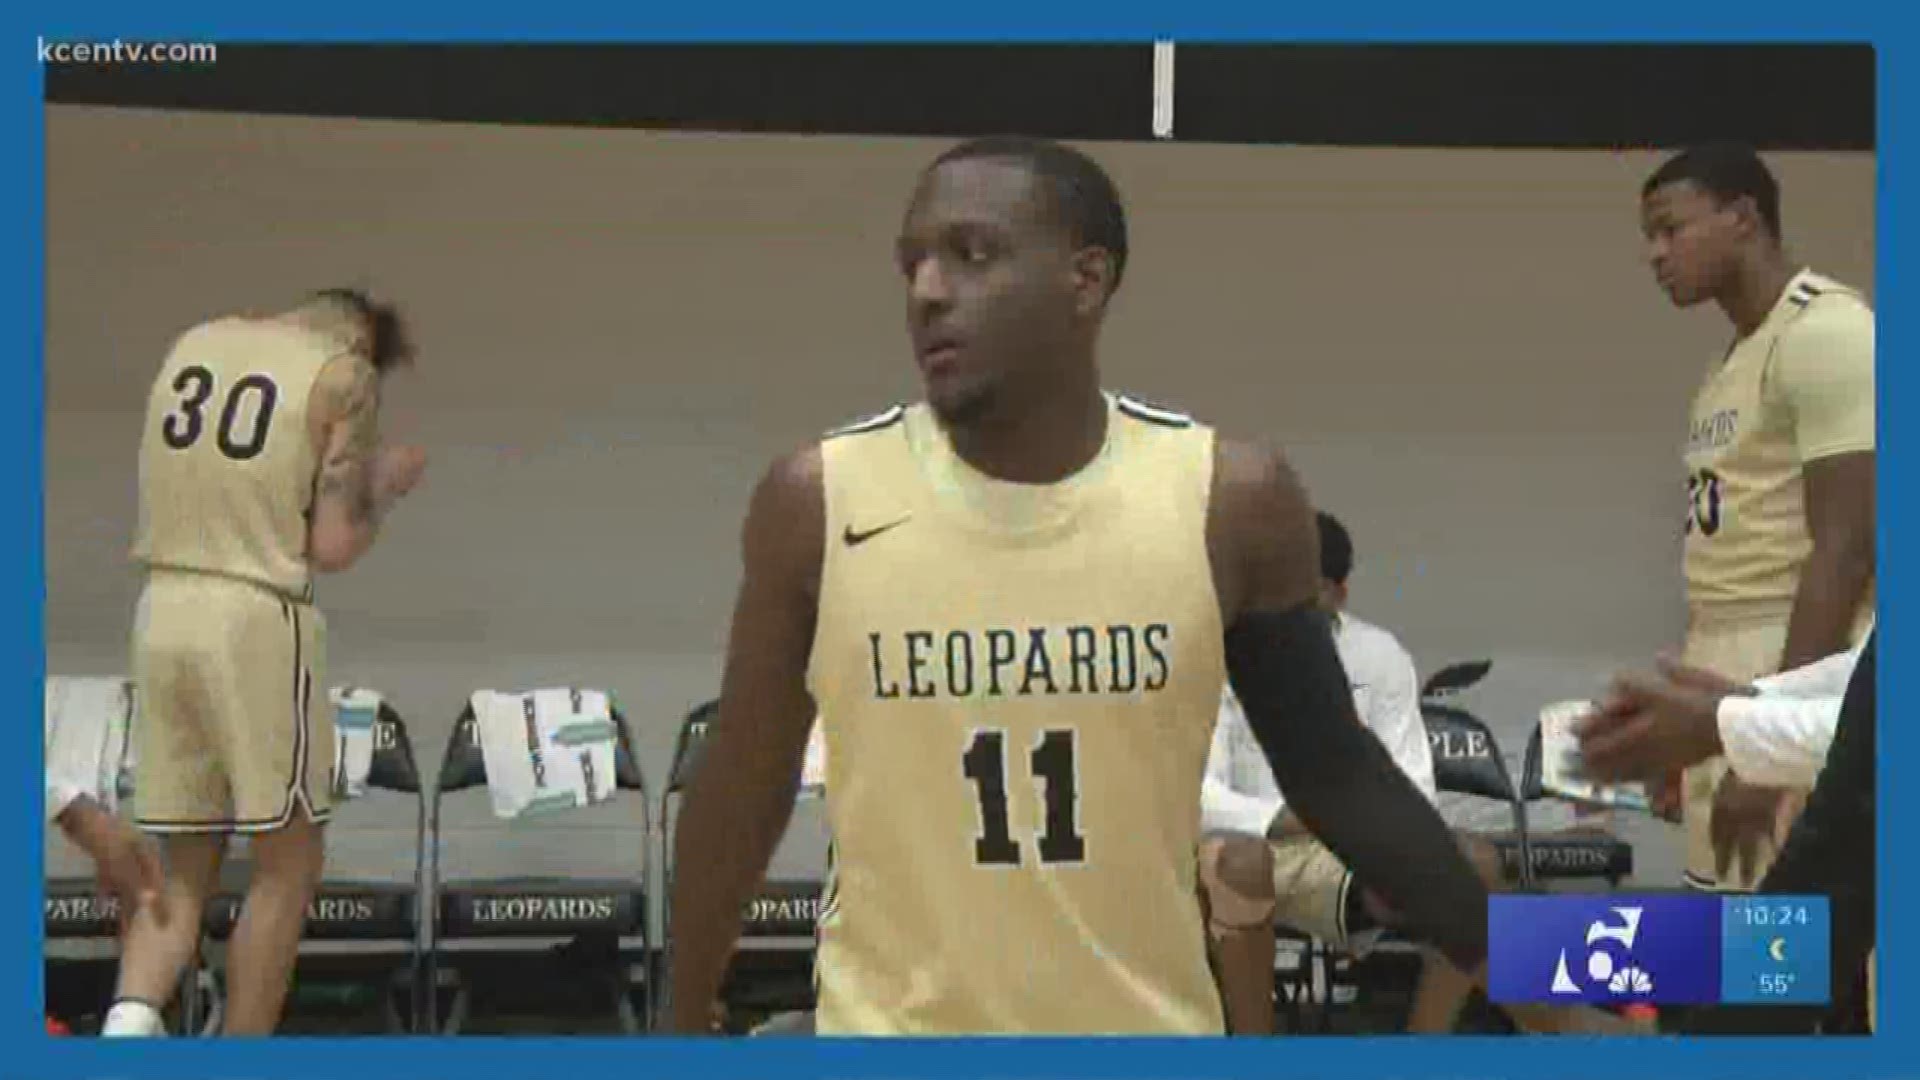 The Temple College Leopards won 87-83 to remain in sole possession of first place in the North Texas Conference.